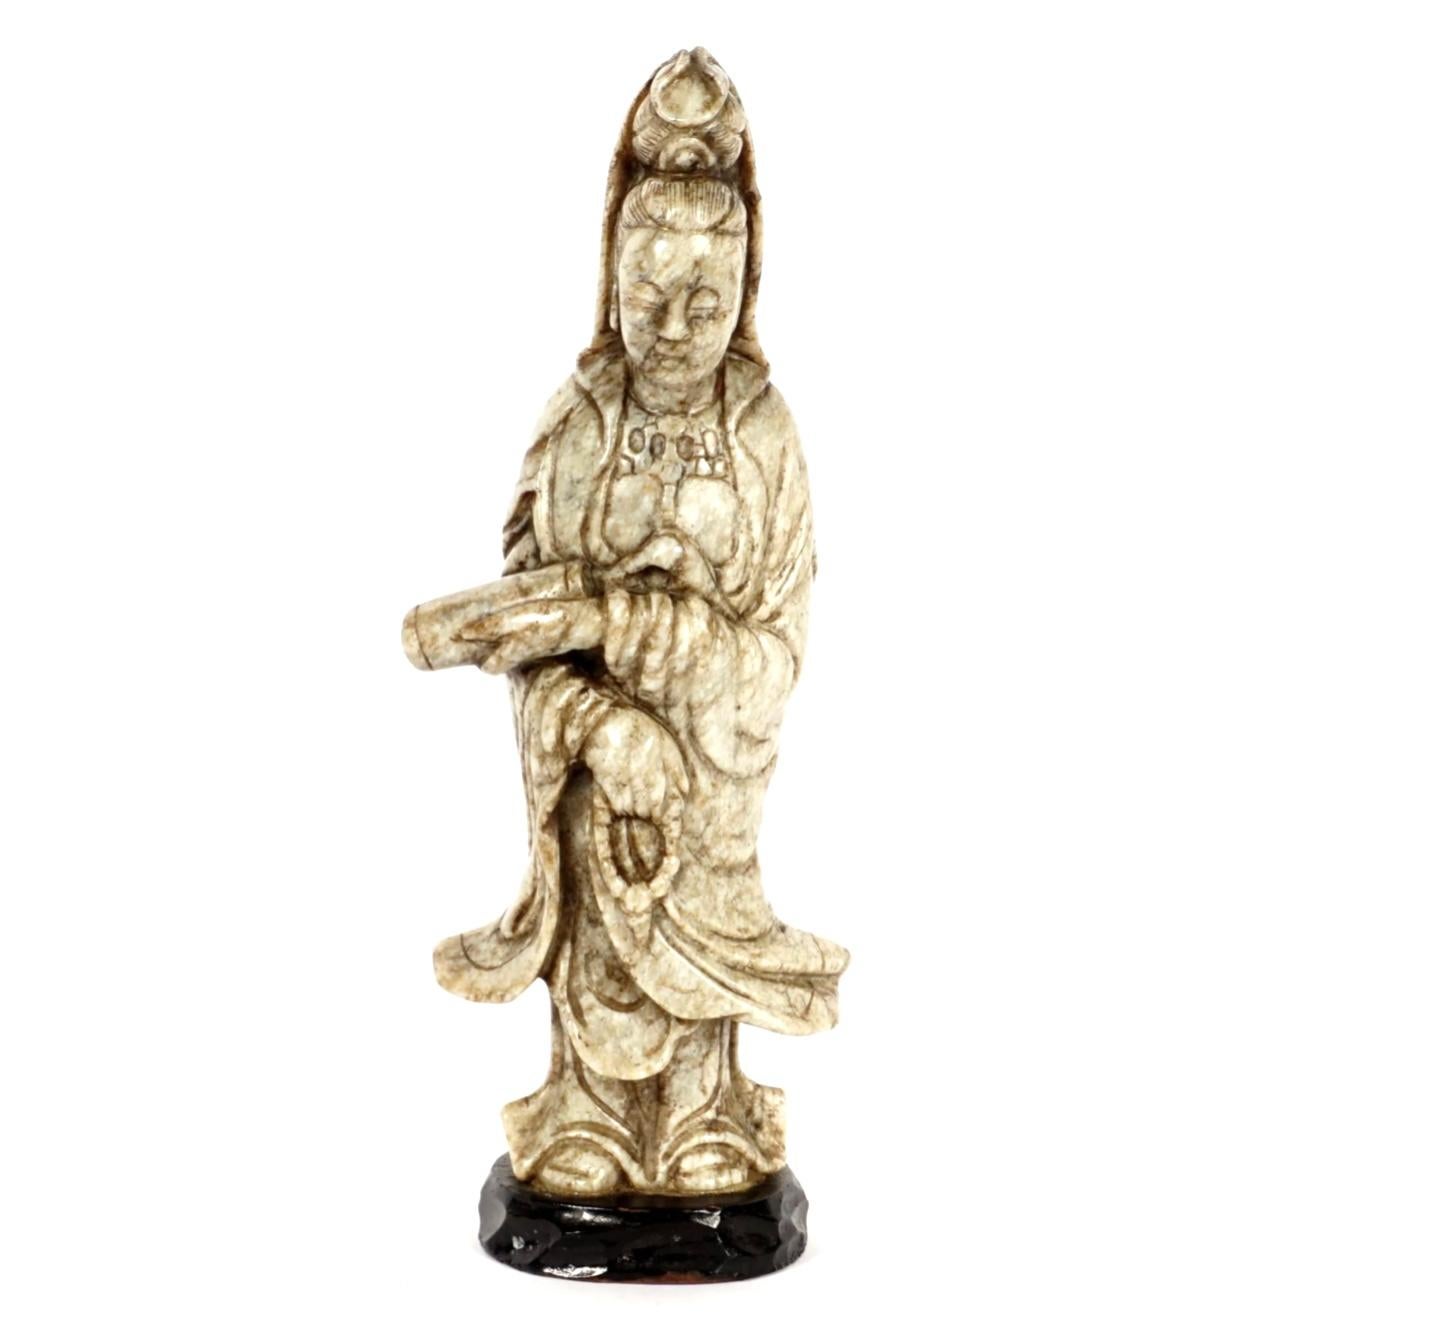 Most likely Ming 15th/16th Century, carved chicken bone jade figure of a standing Guanyin (Quanyin) holding a scroll in one hand, prayer beads in the other. Affixed to carved wood base, older label underneath, figure measures 6.75